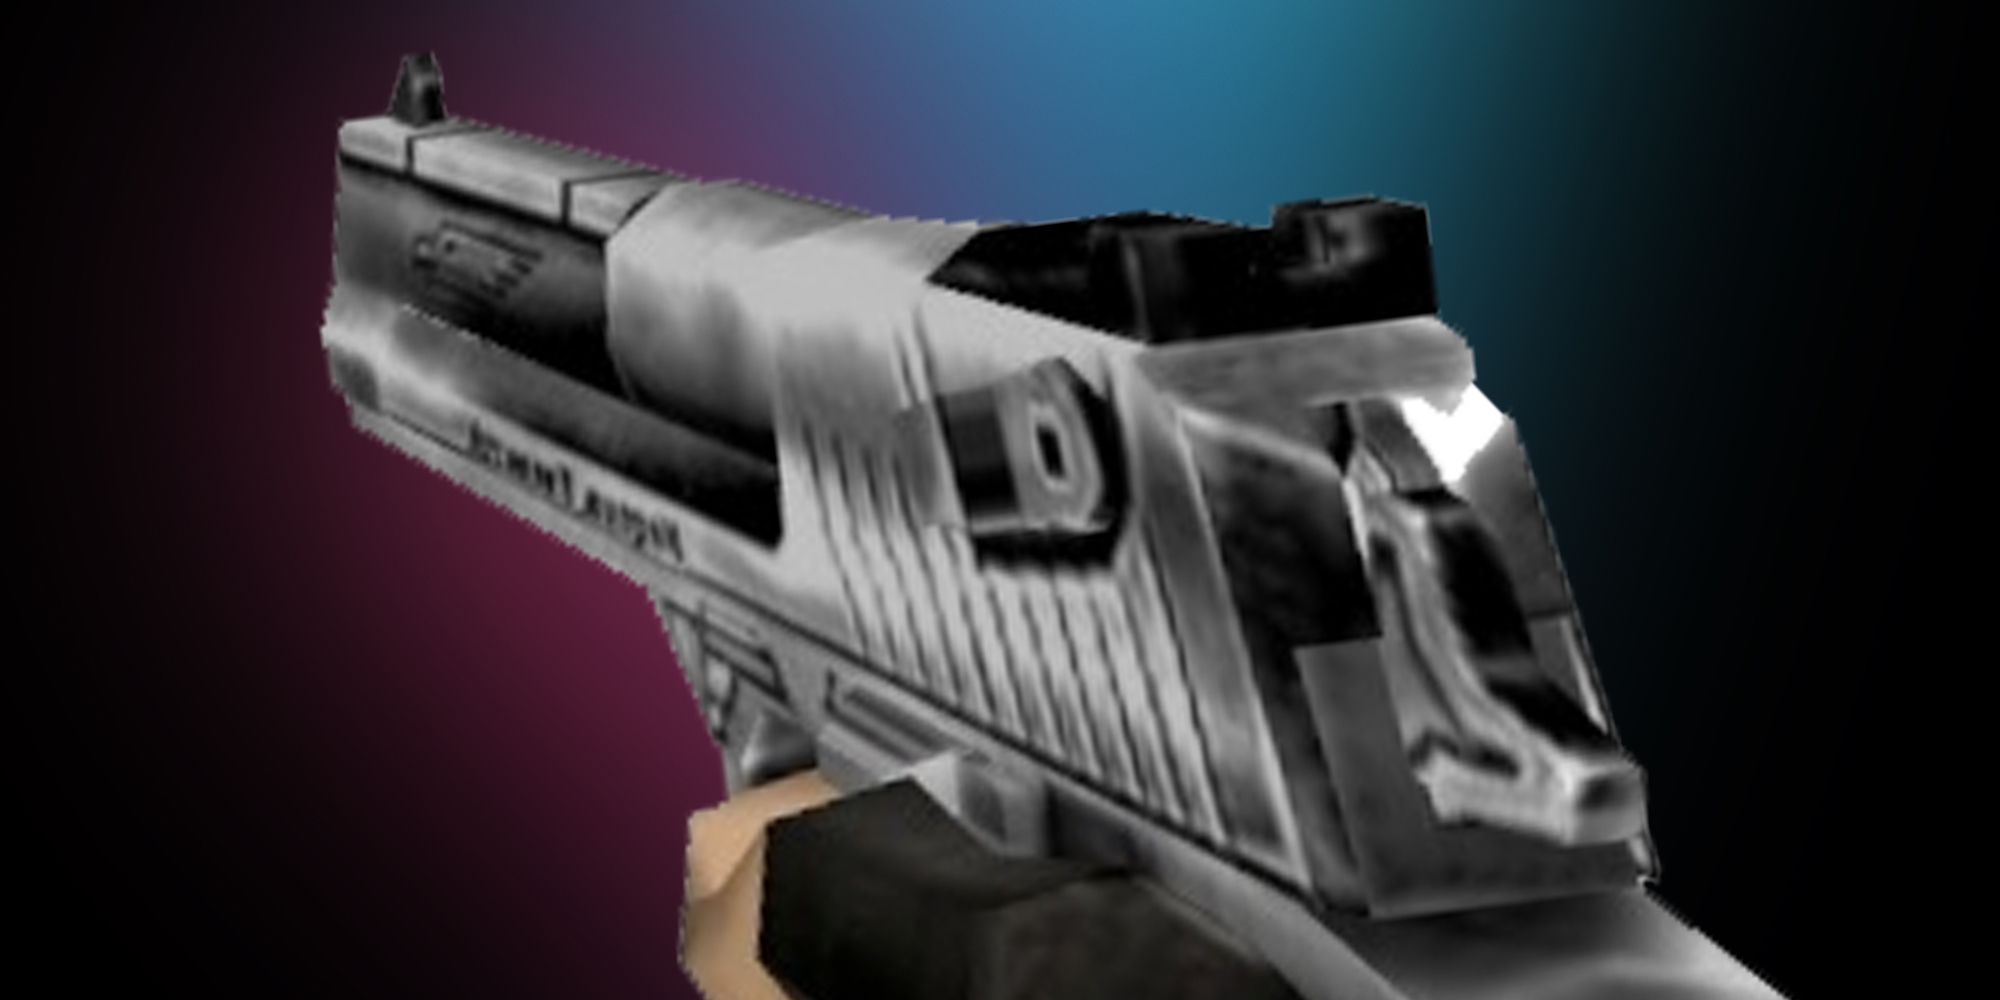 Counter-Strike Deagle from a first-person POV over a purple, black, and blue gradient background